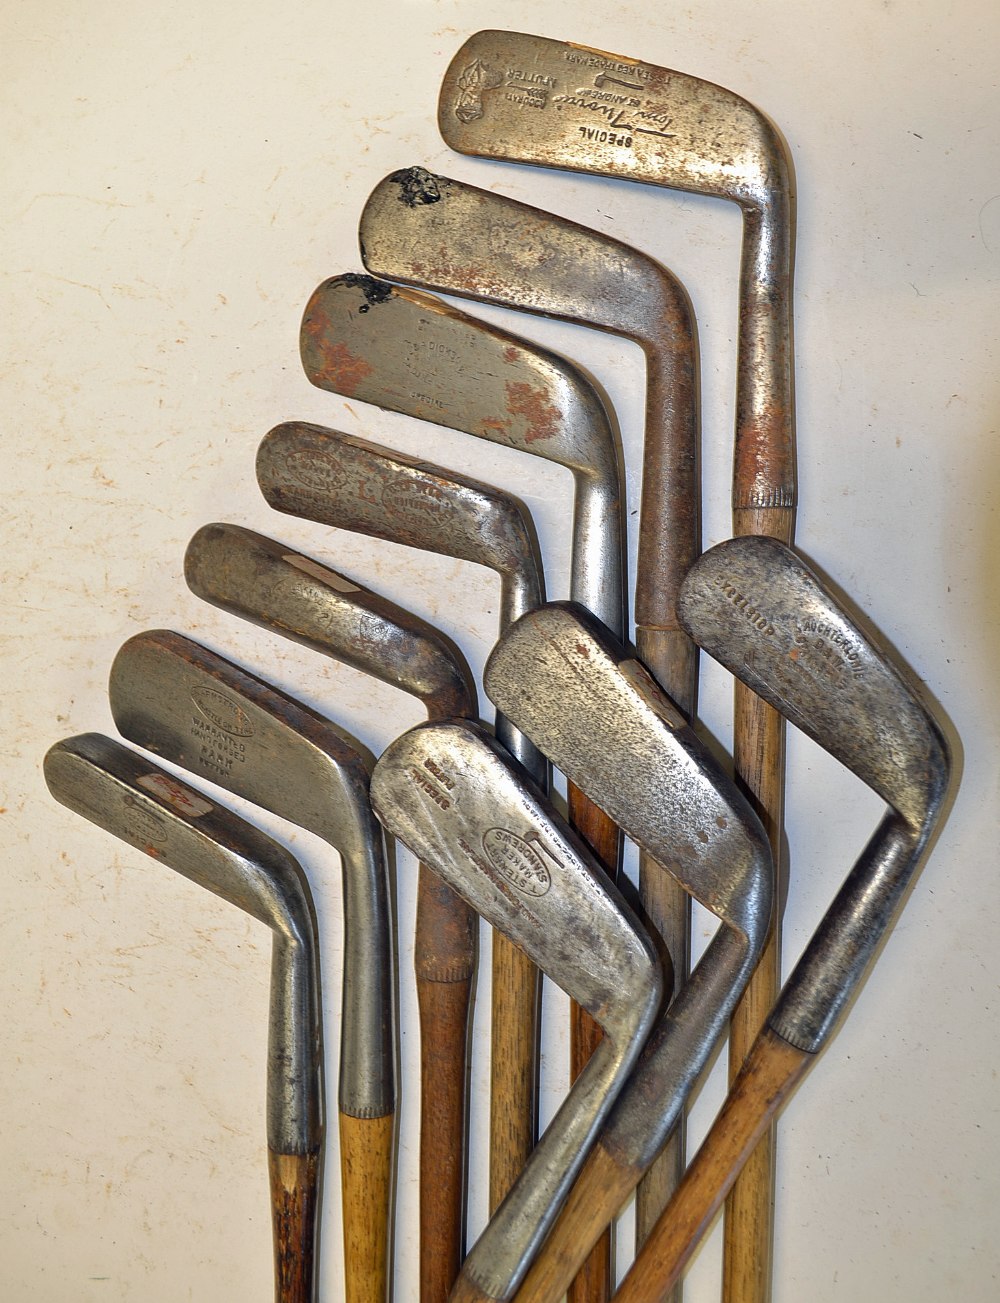 10x assorted putters to incl Tom Morris/Tom Stewart wry neck with Tom Morris portrait, 2x Tom